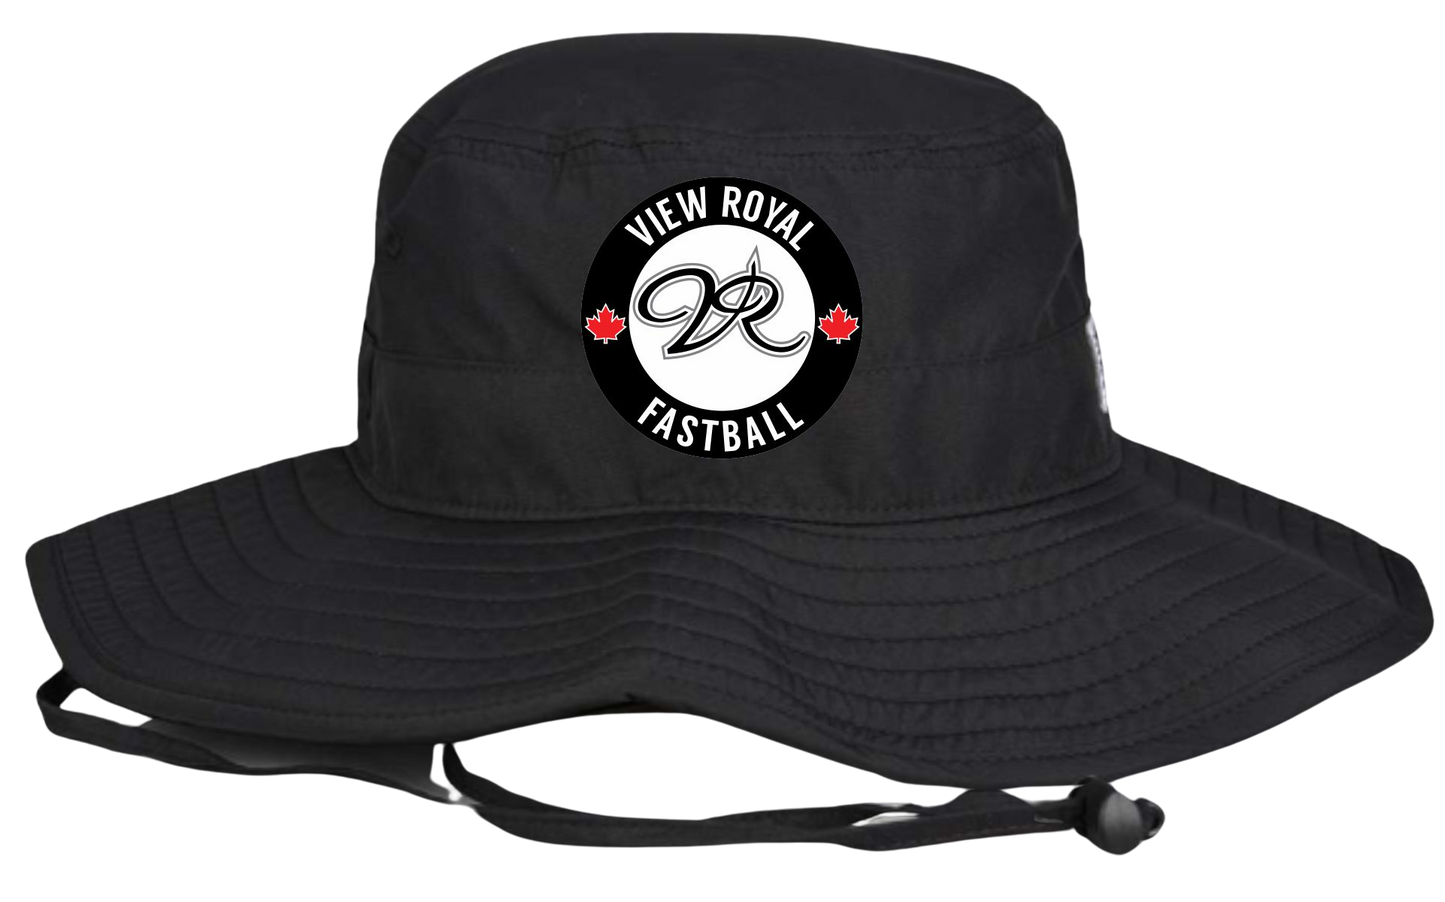 View Royal Fastball Bucket Hat